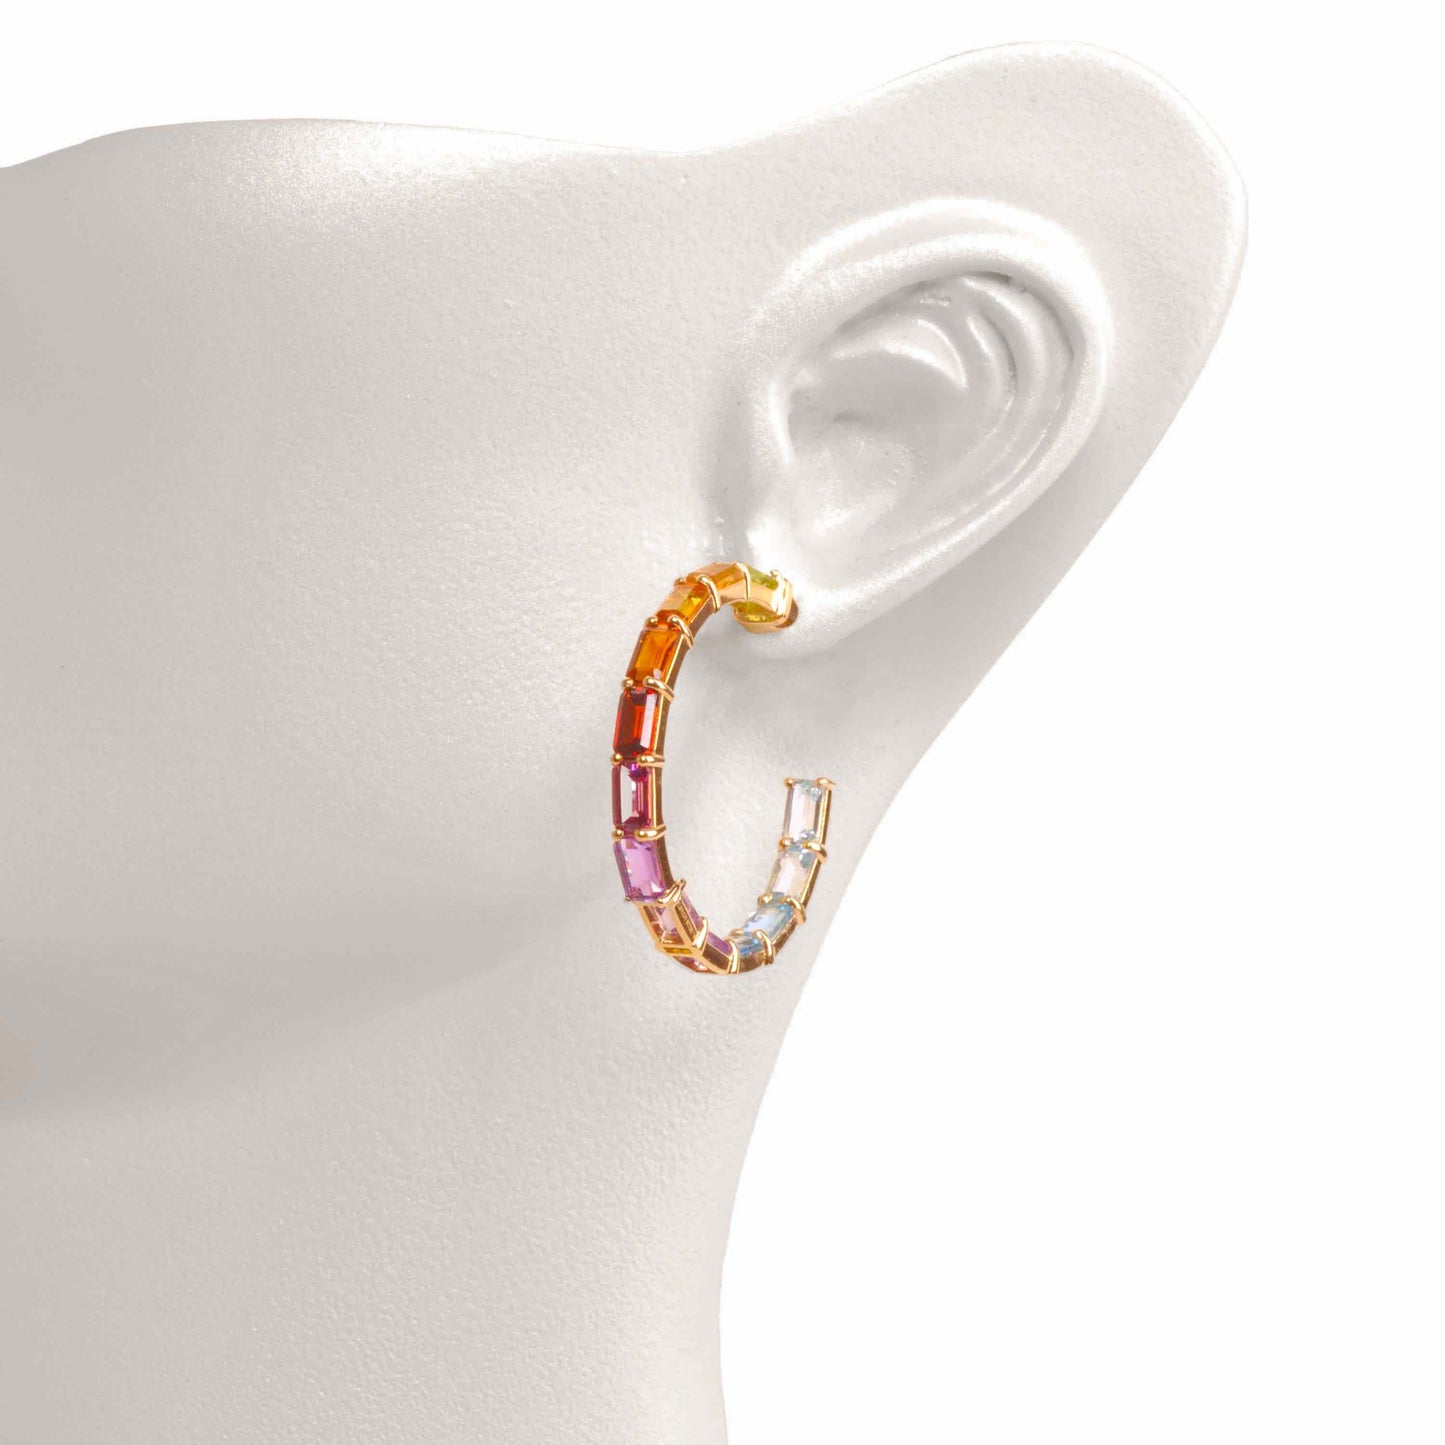 Multicolor hoop earrings with unique design